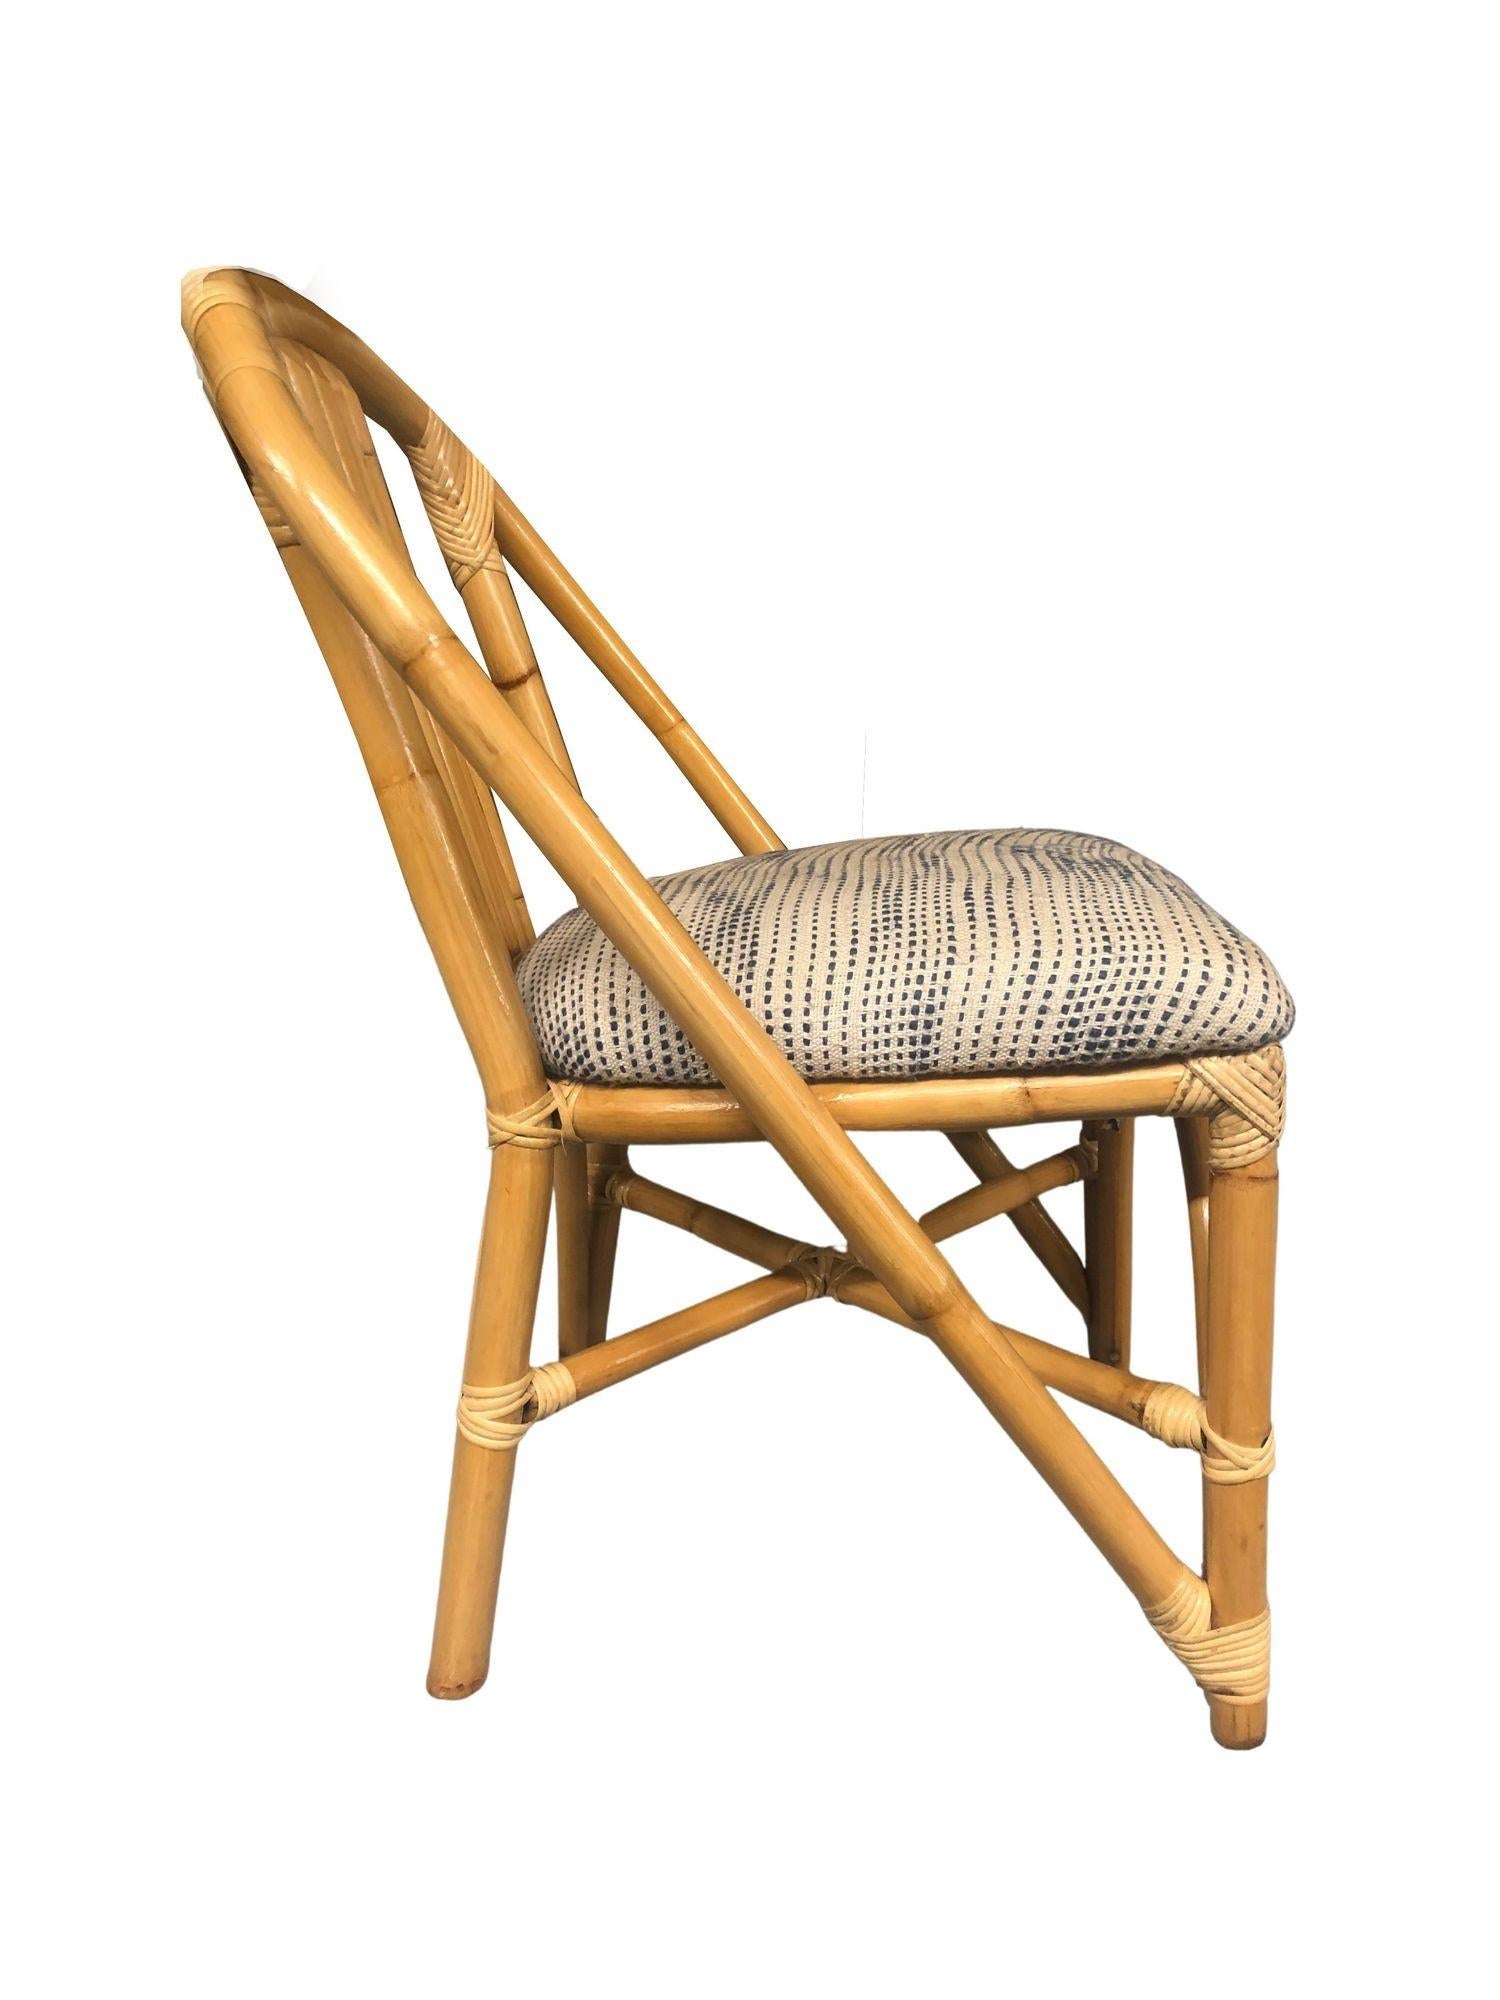 Restored Mid-century era rattan side accent chair featuring 5 strand seat back with a horseshoe arch that stretches from the front legs around the entirety of the chair to form a sculptural seat back. This side chair works great as an accent, at any